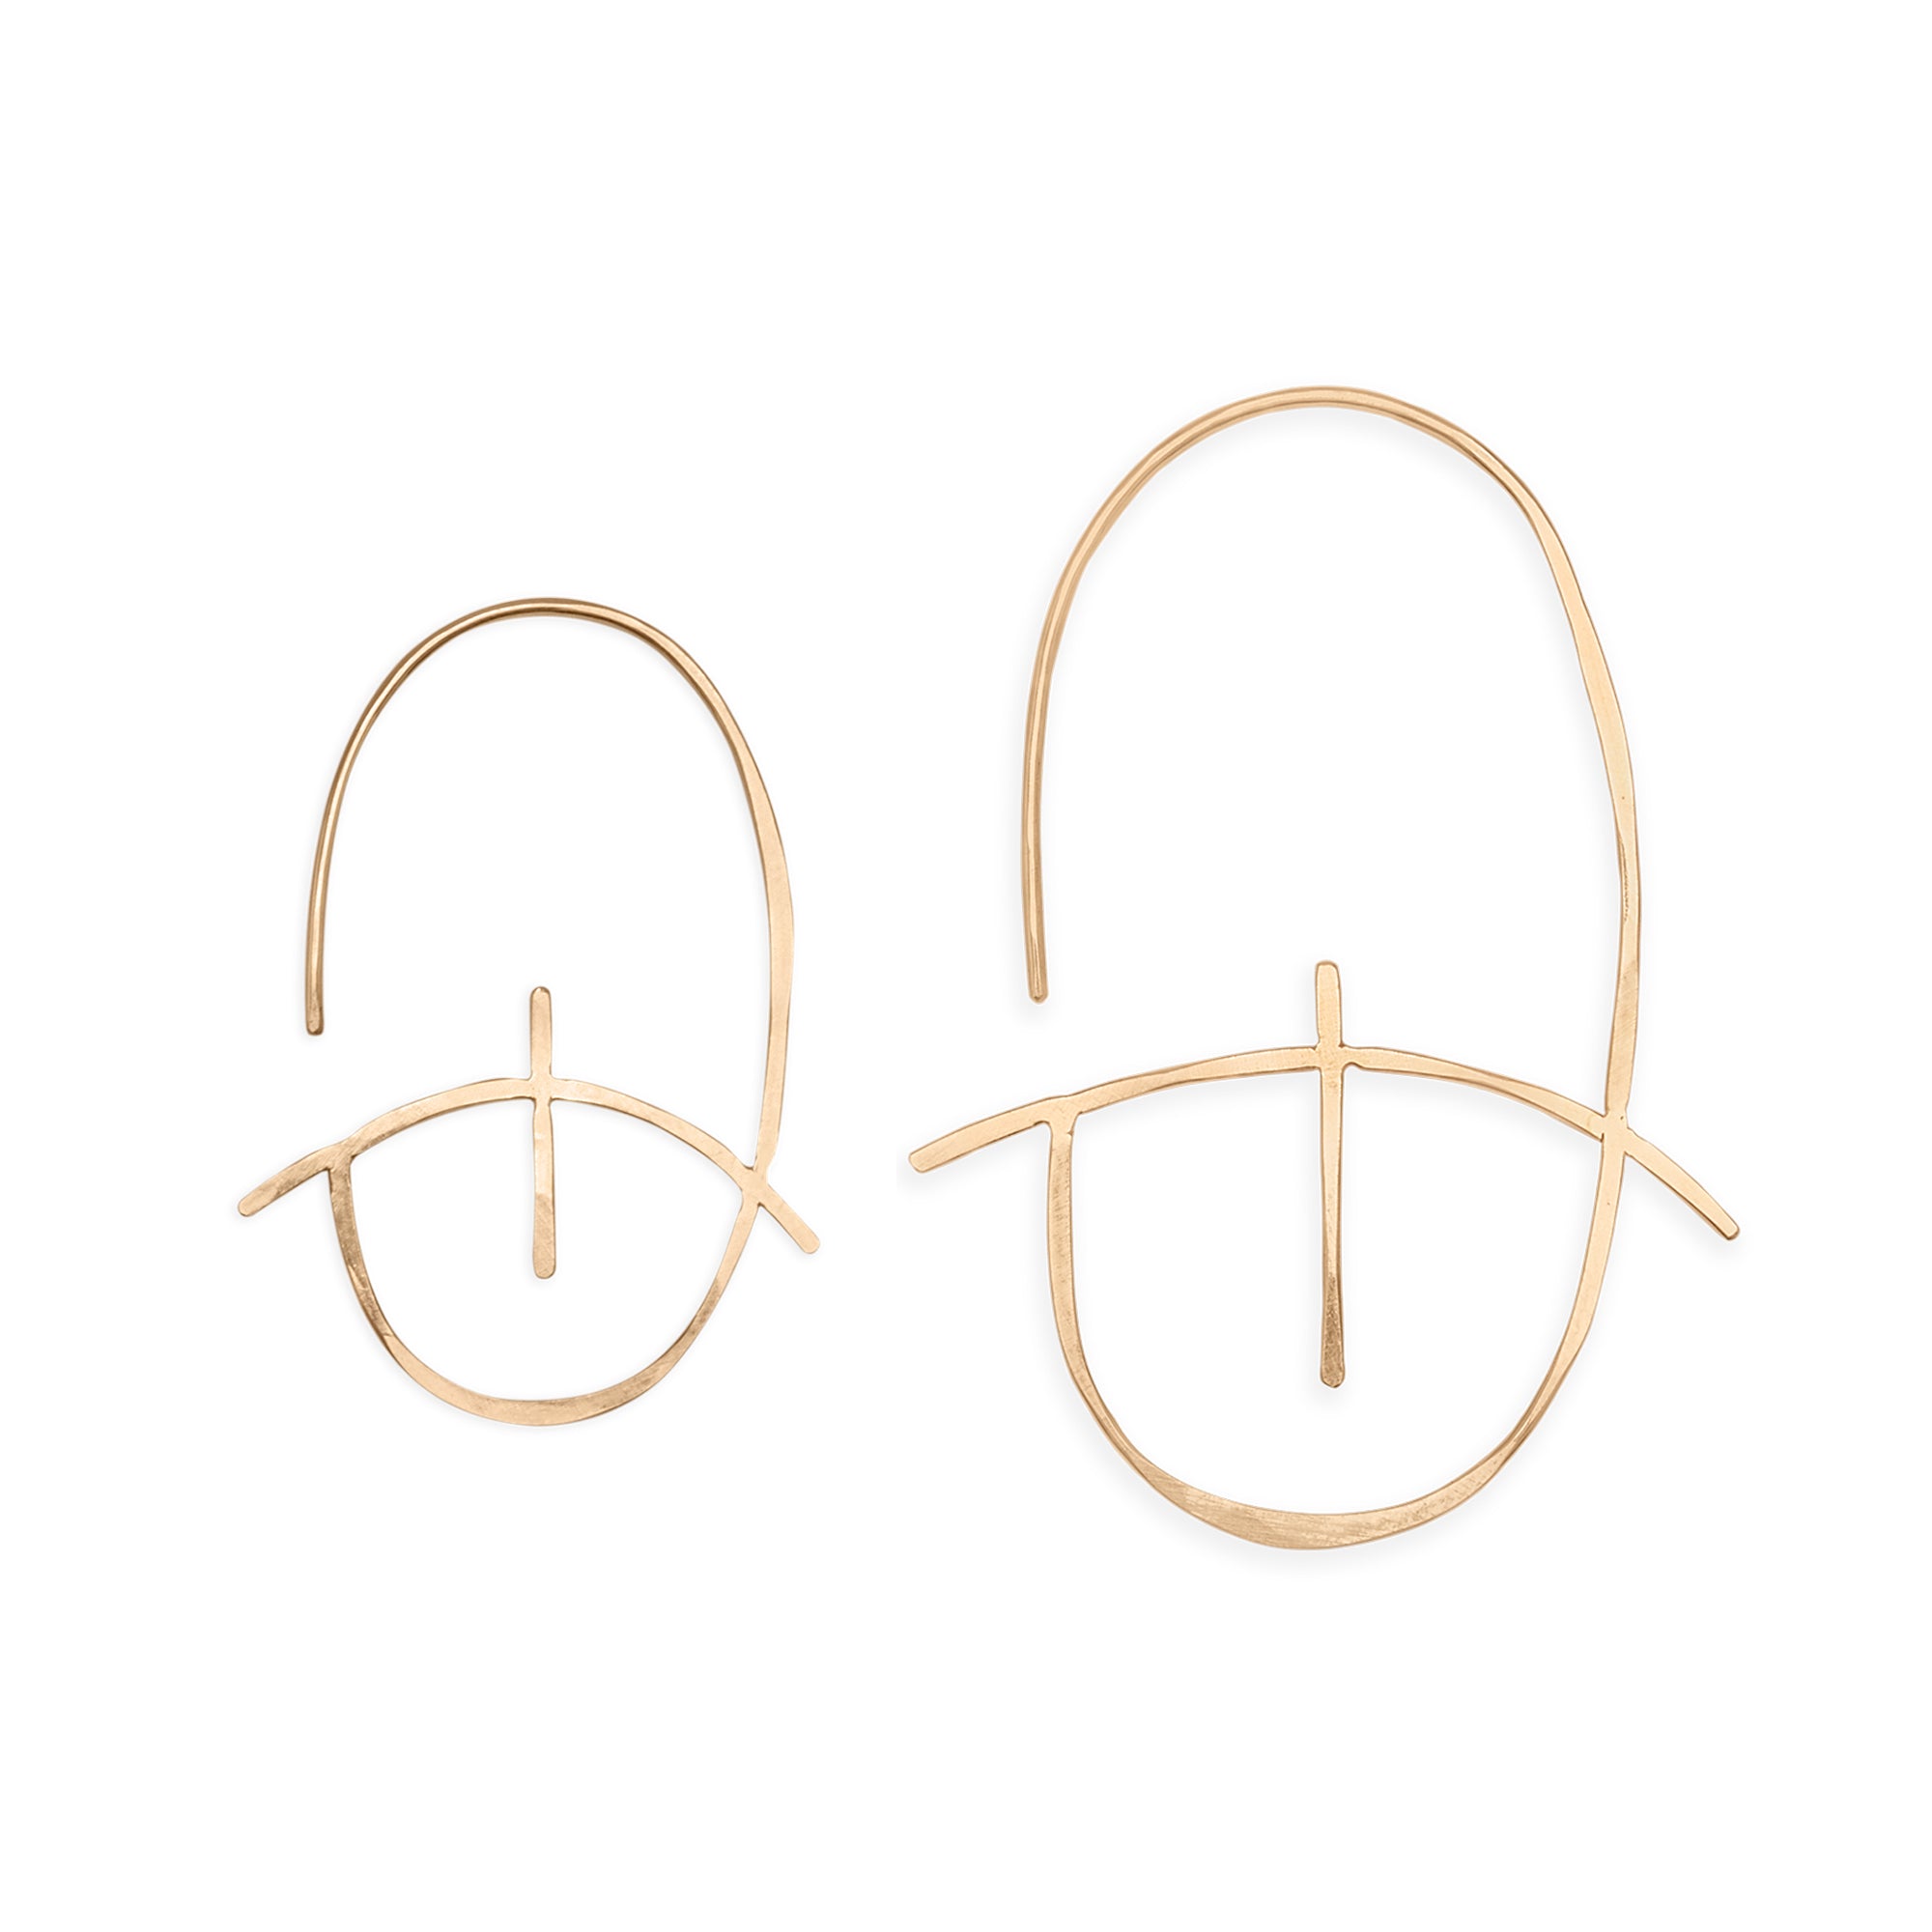 A modern take on the classic hoop, our 14k gold Altar Hoop features an oval shape with a chic arch design on the inside